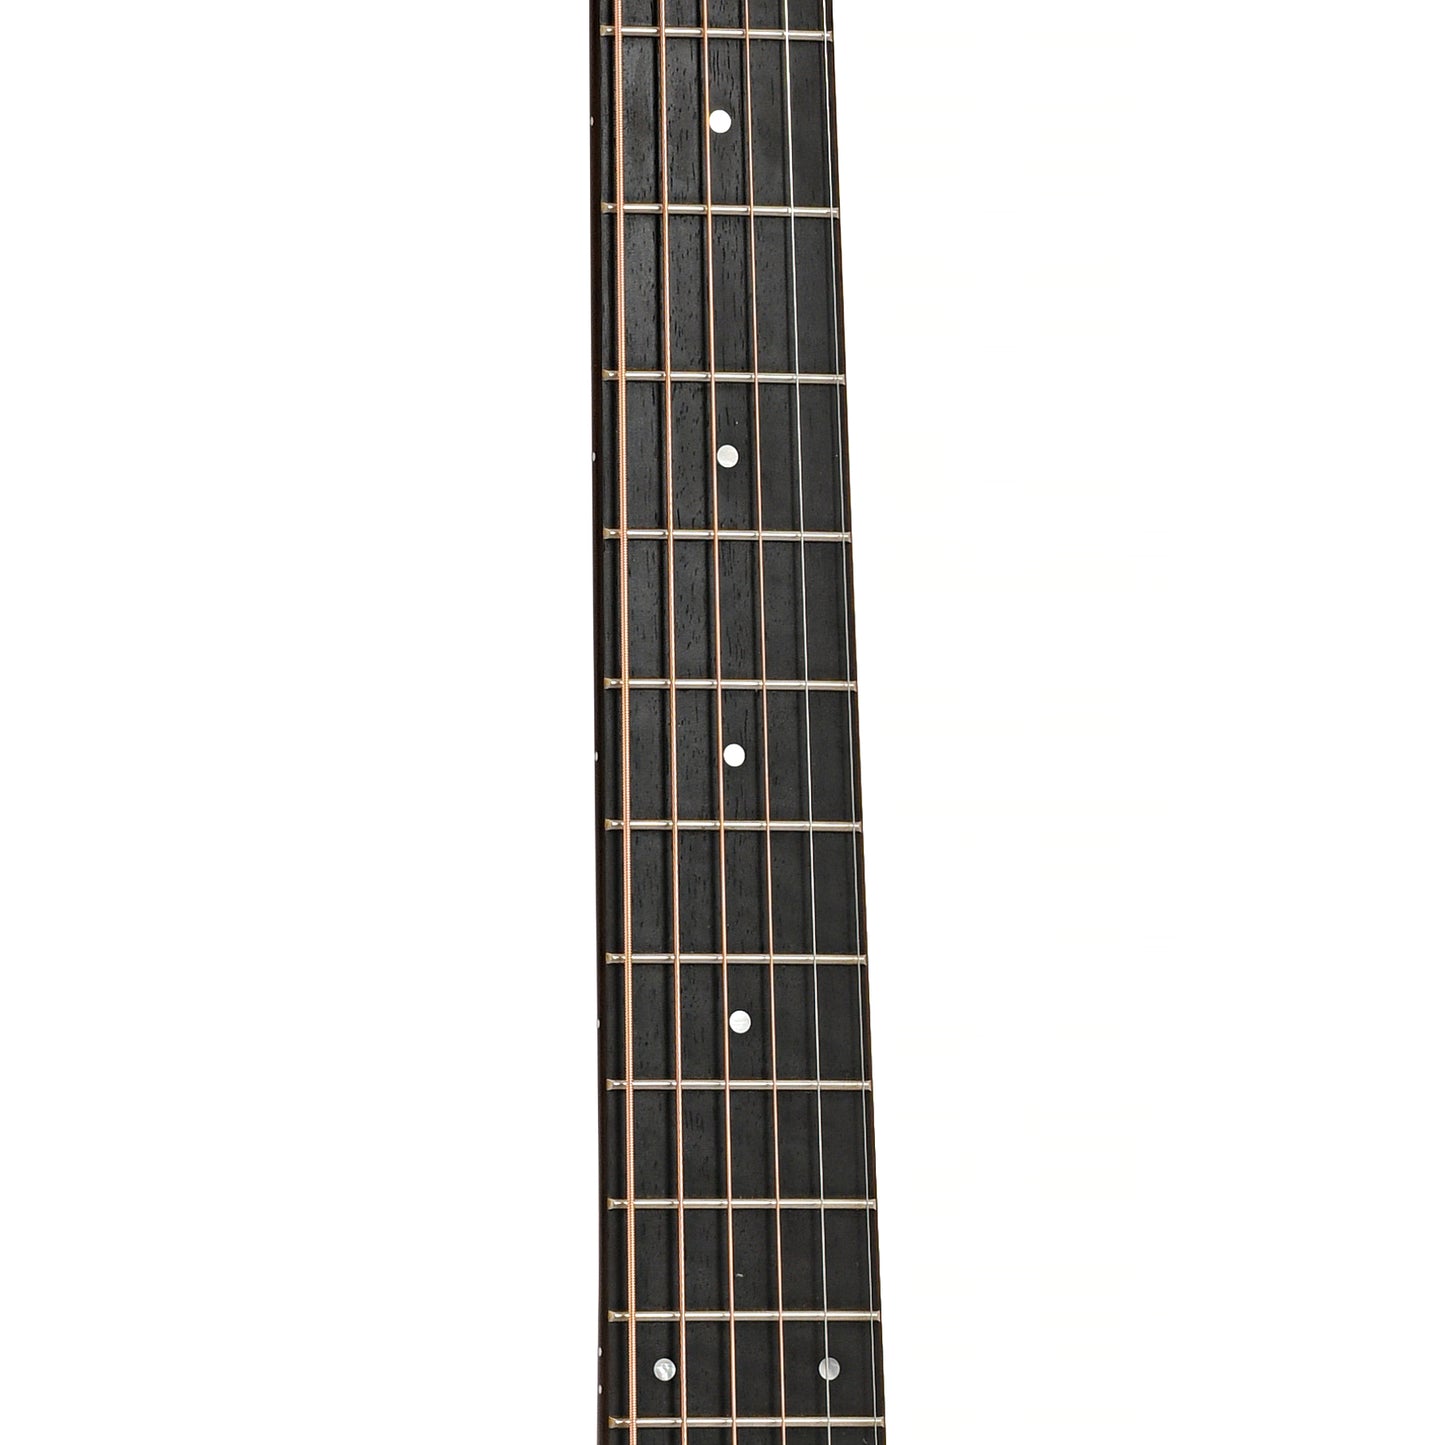 Fretboard of Taylor 710 Acoustic Guitar 